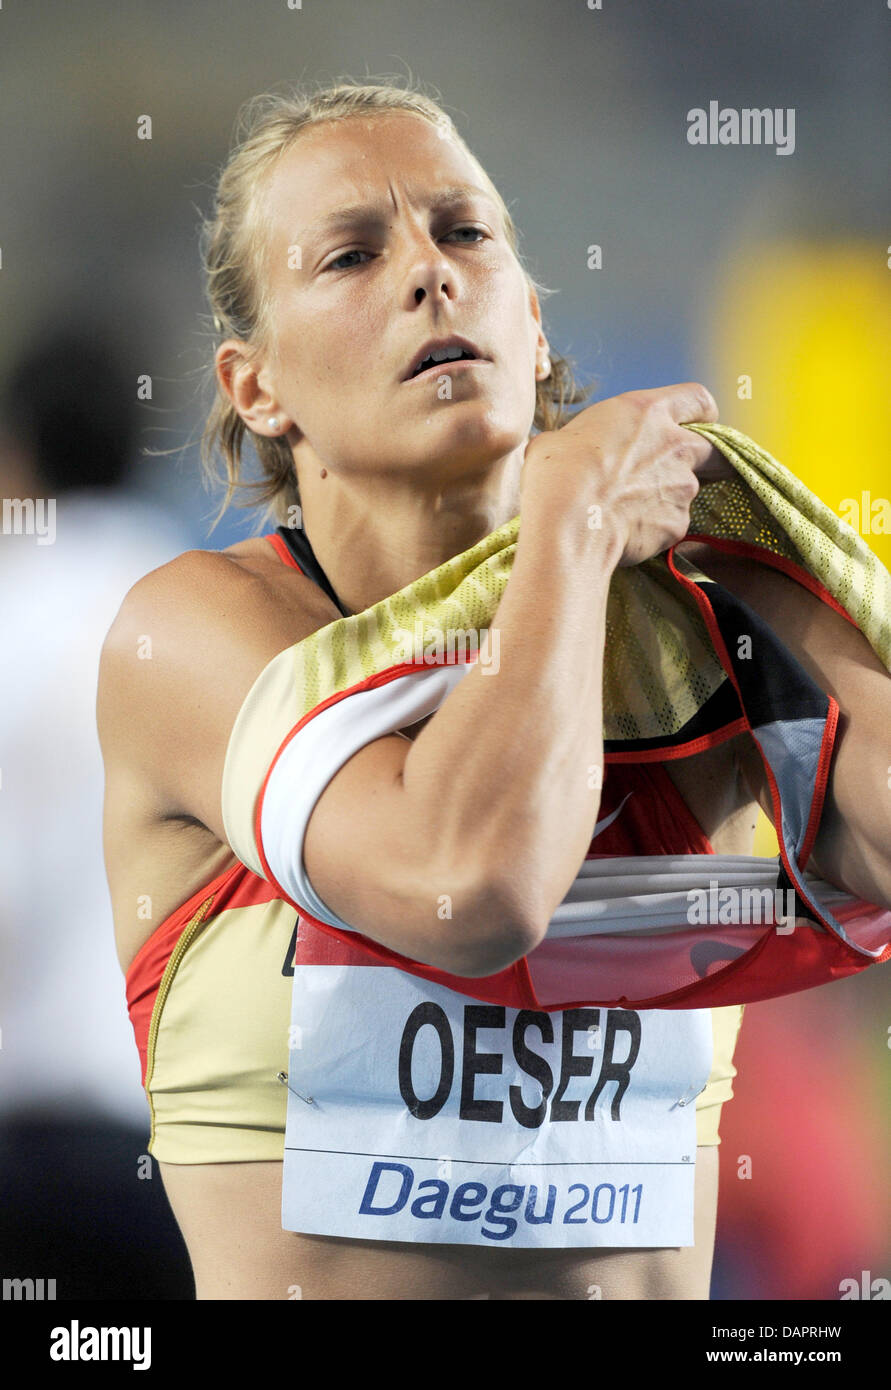 Jennifer Oeser of Germany reacts in the Shot Put event of the Heptathlon competition at the 13th IAAF World Championships in Athletics in Daegu, Republic of Korea, 29 August 2011. Photo: Rainer Jensen dpa  +++(c) dpa - Bildfunk+++ Stock Photo